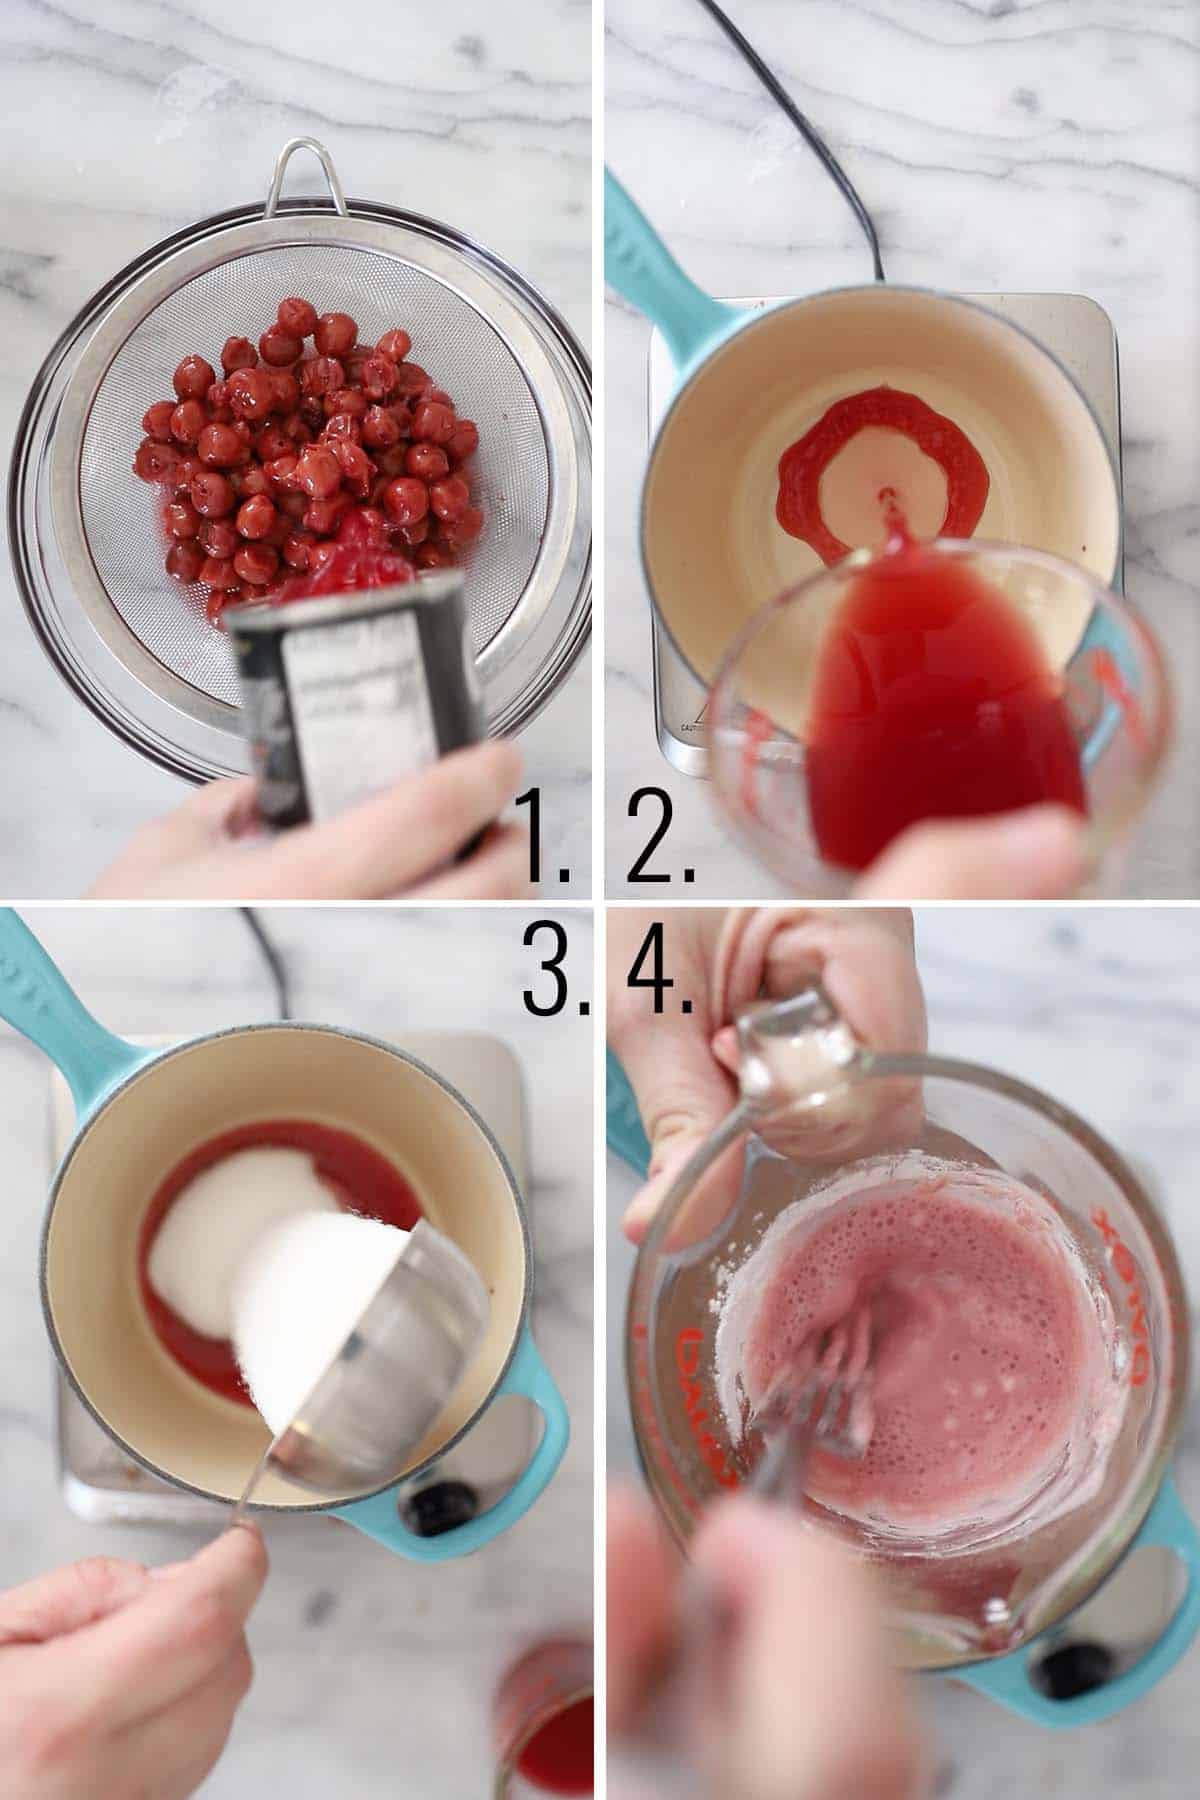 How to make homemade pie filling.